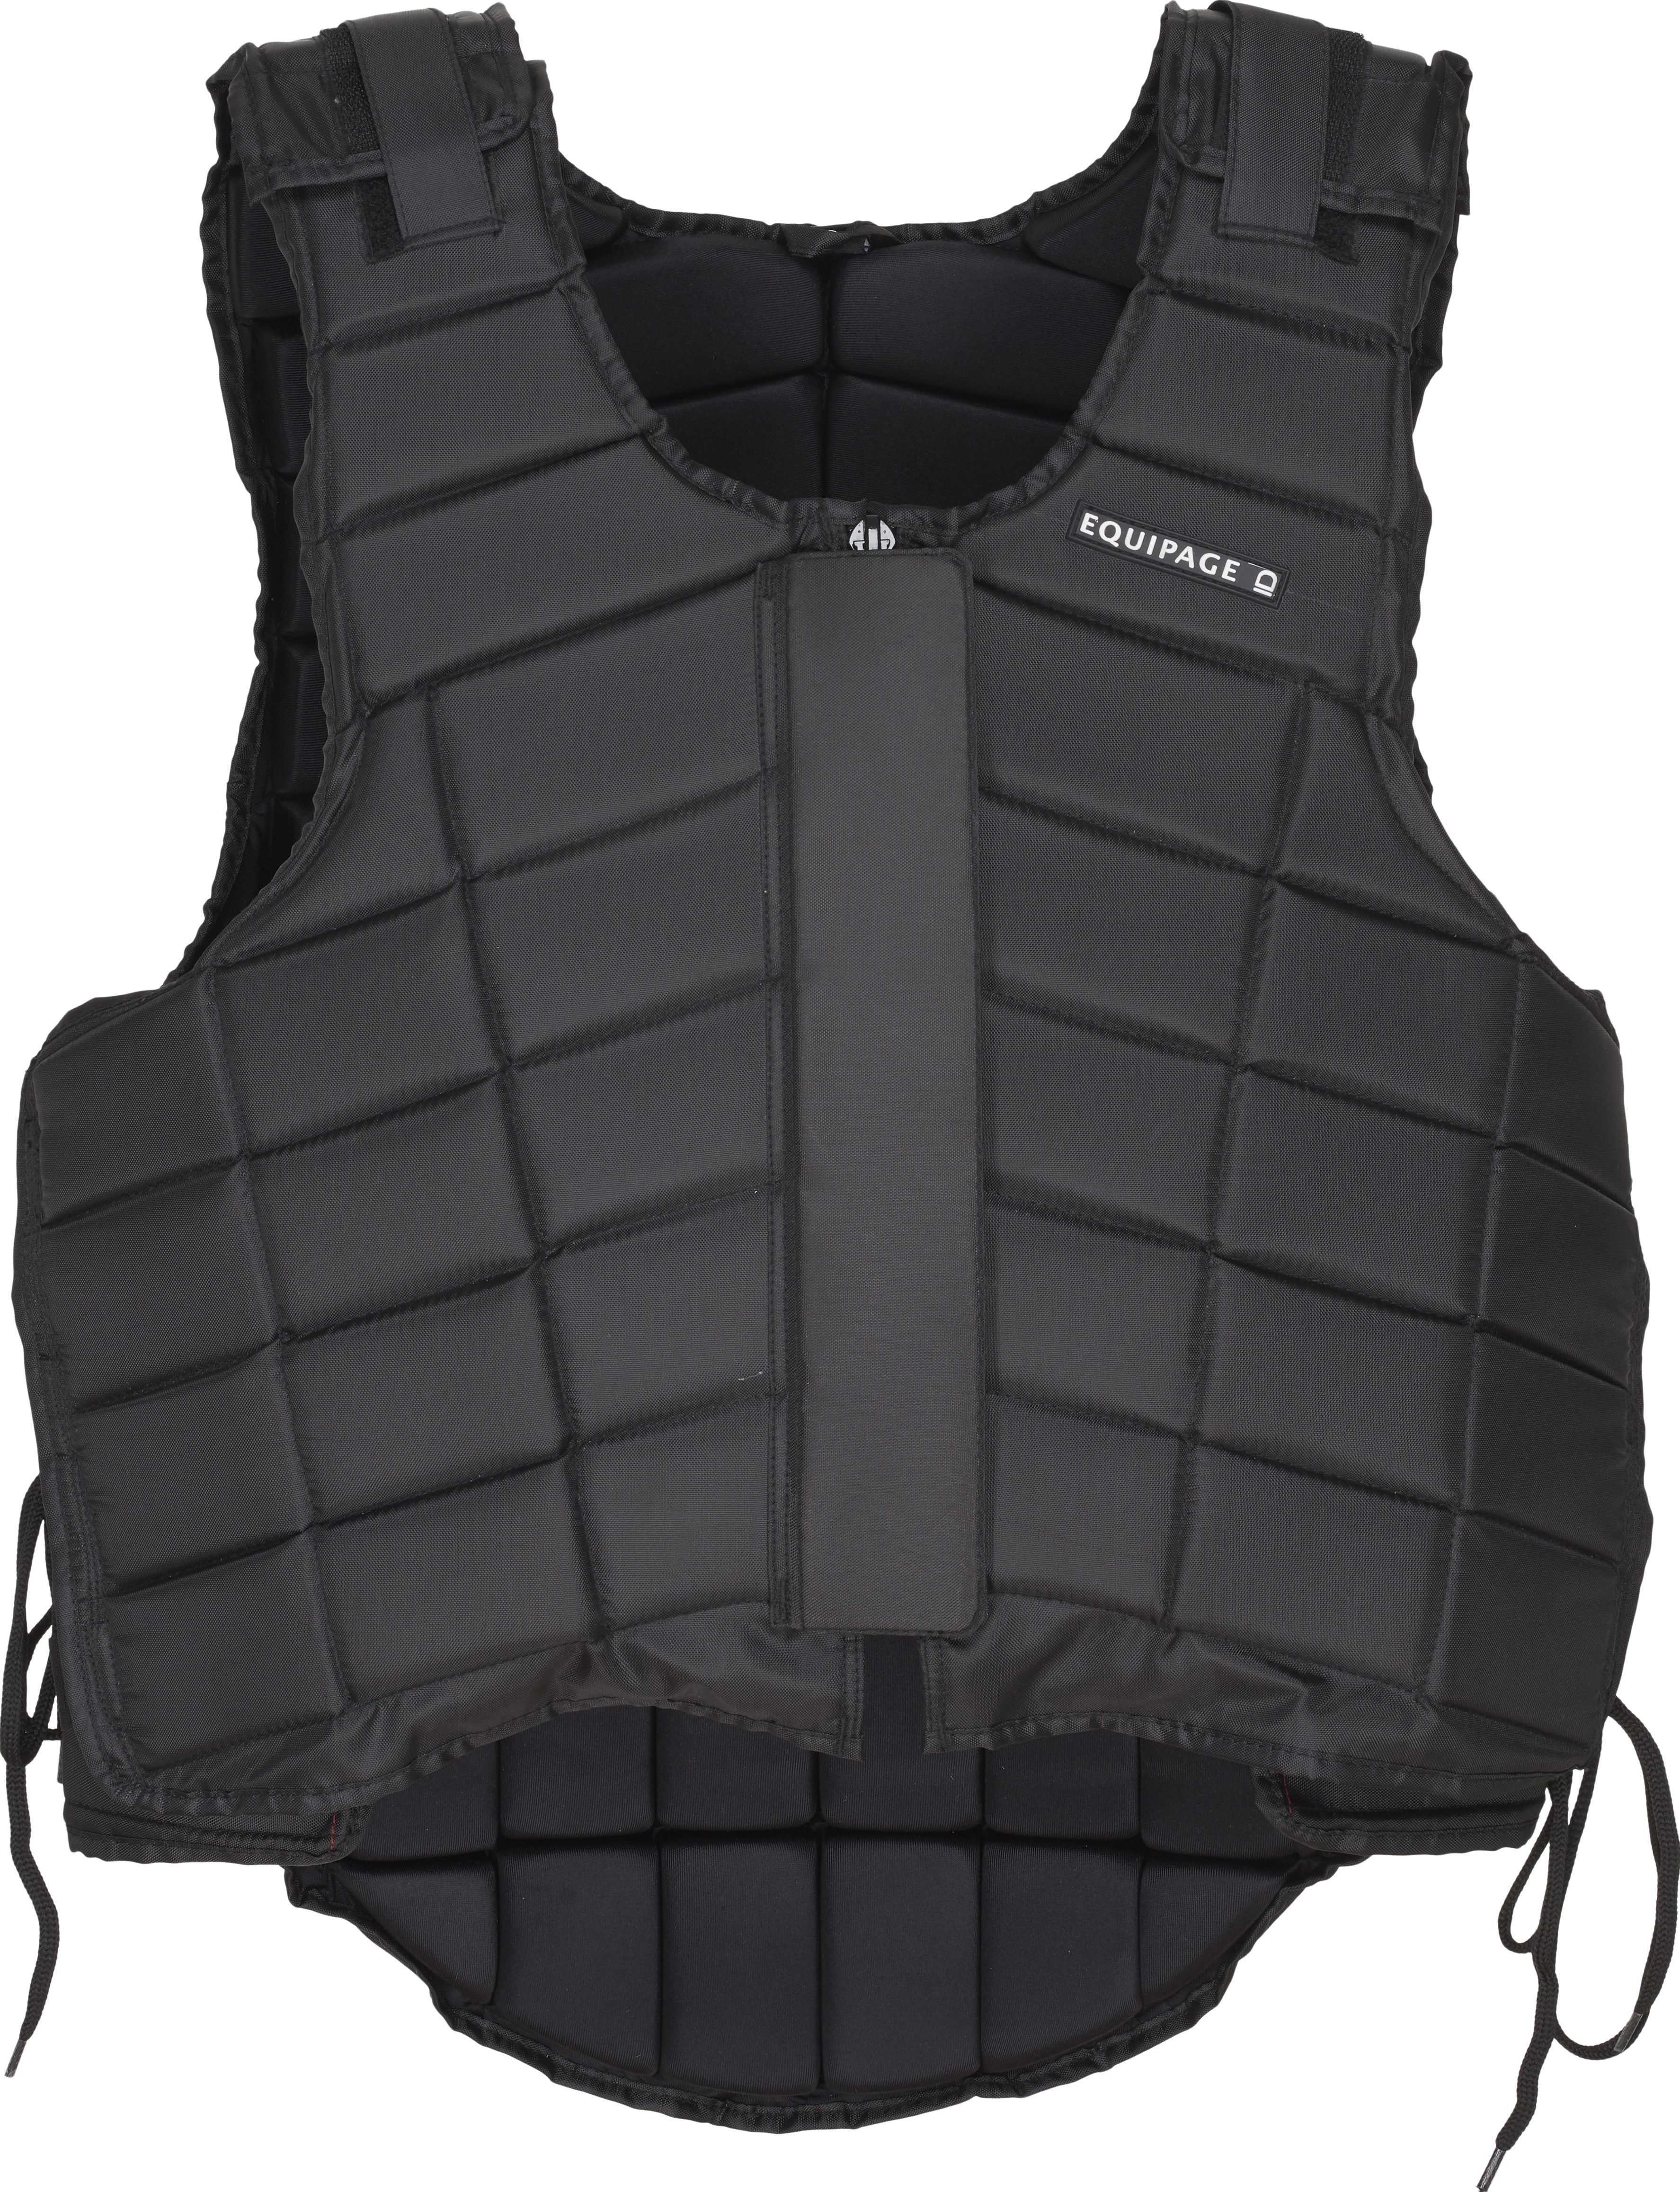 Equipage Rider Body Protector - Black (M)